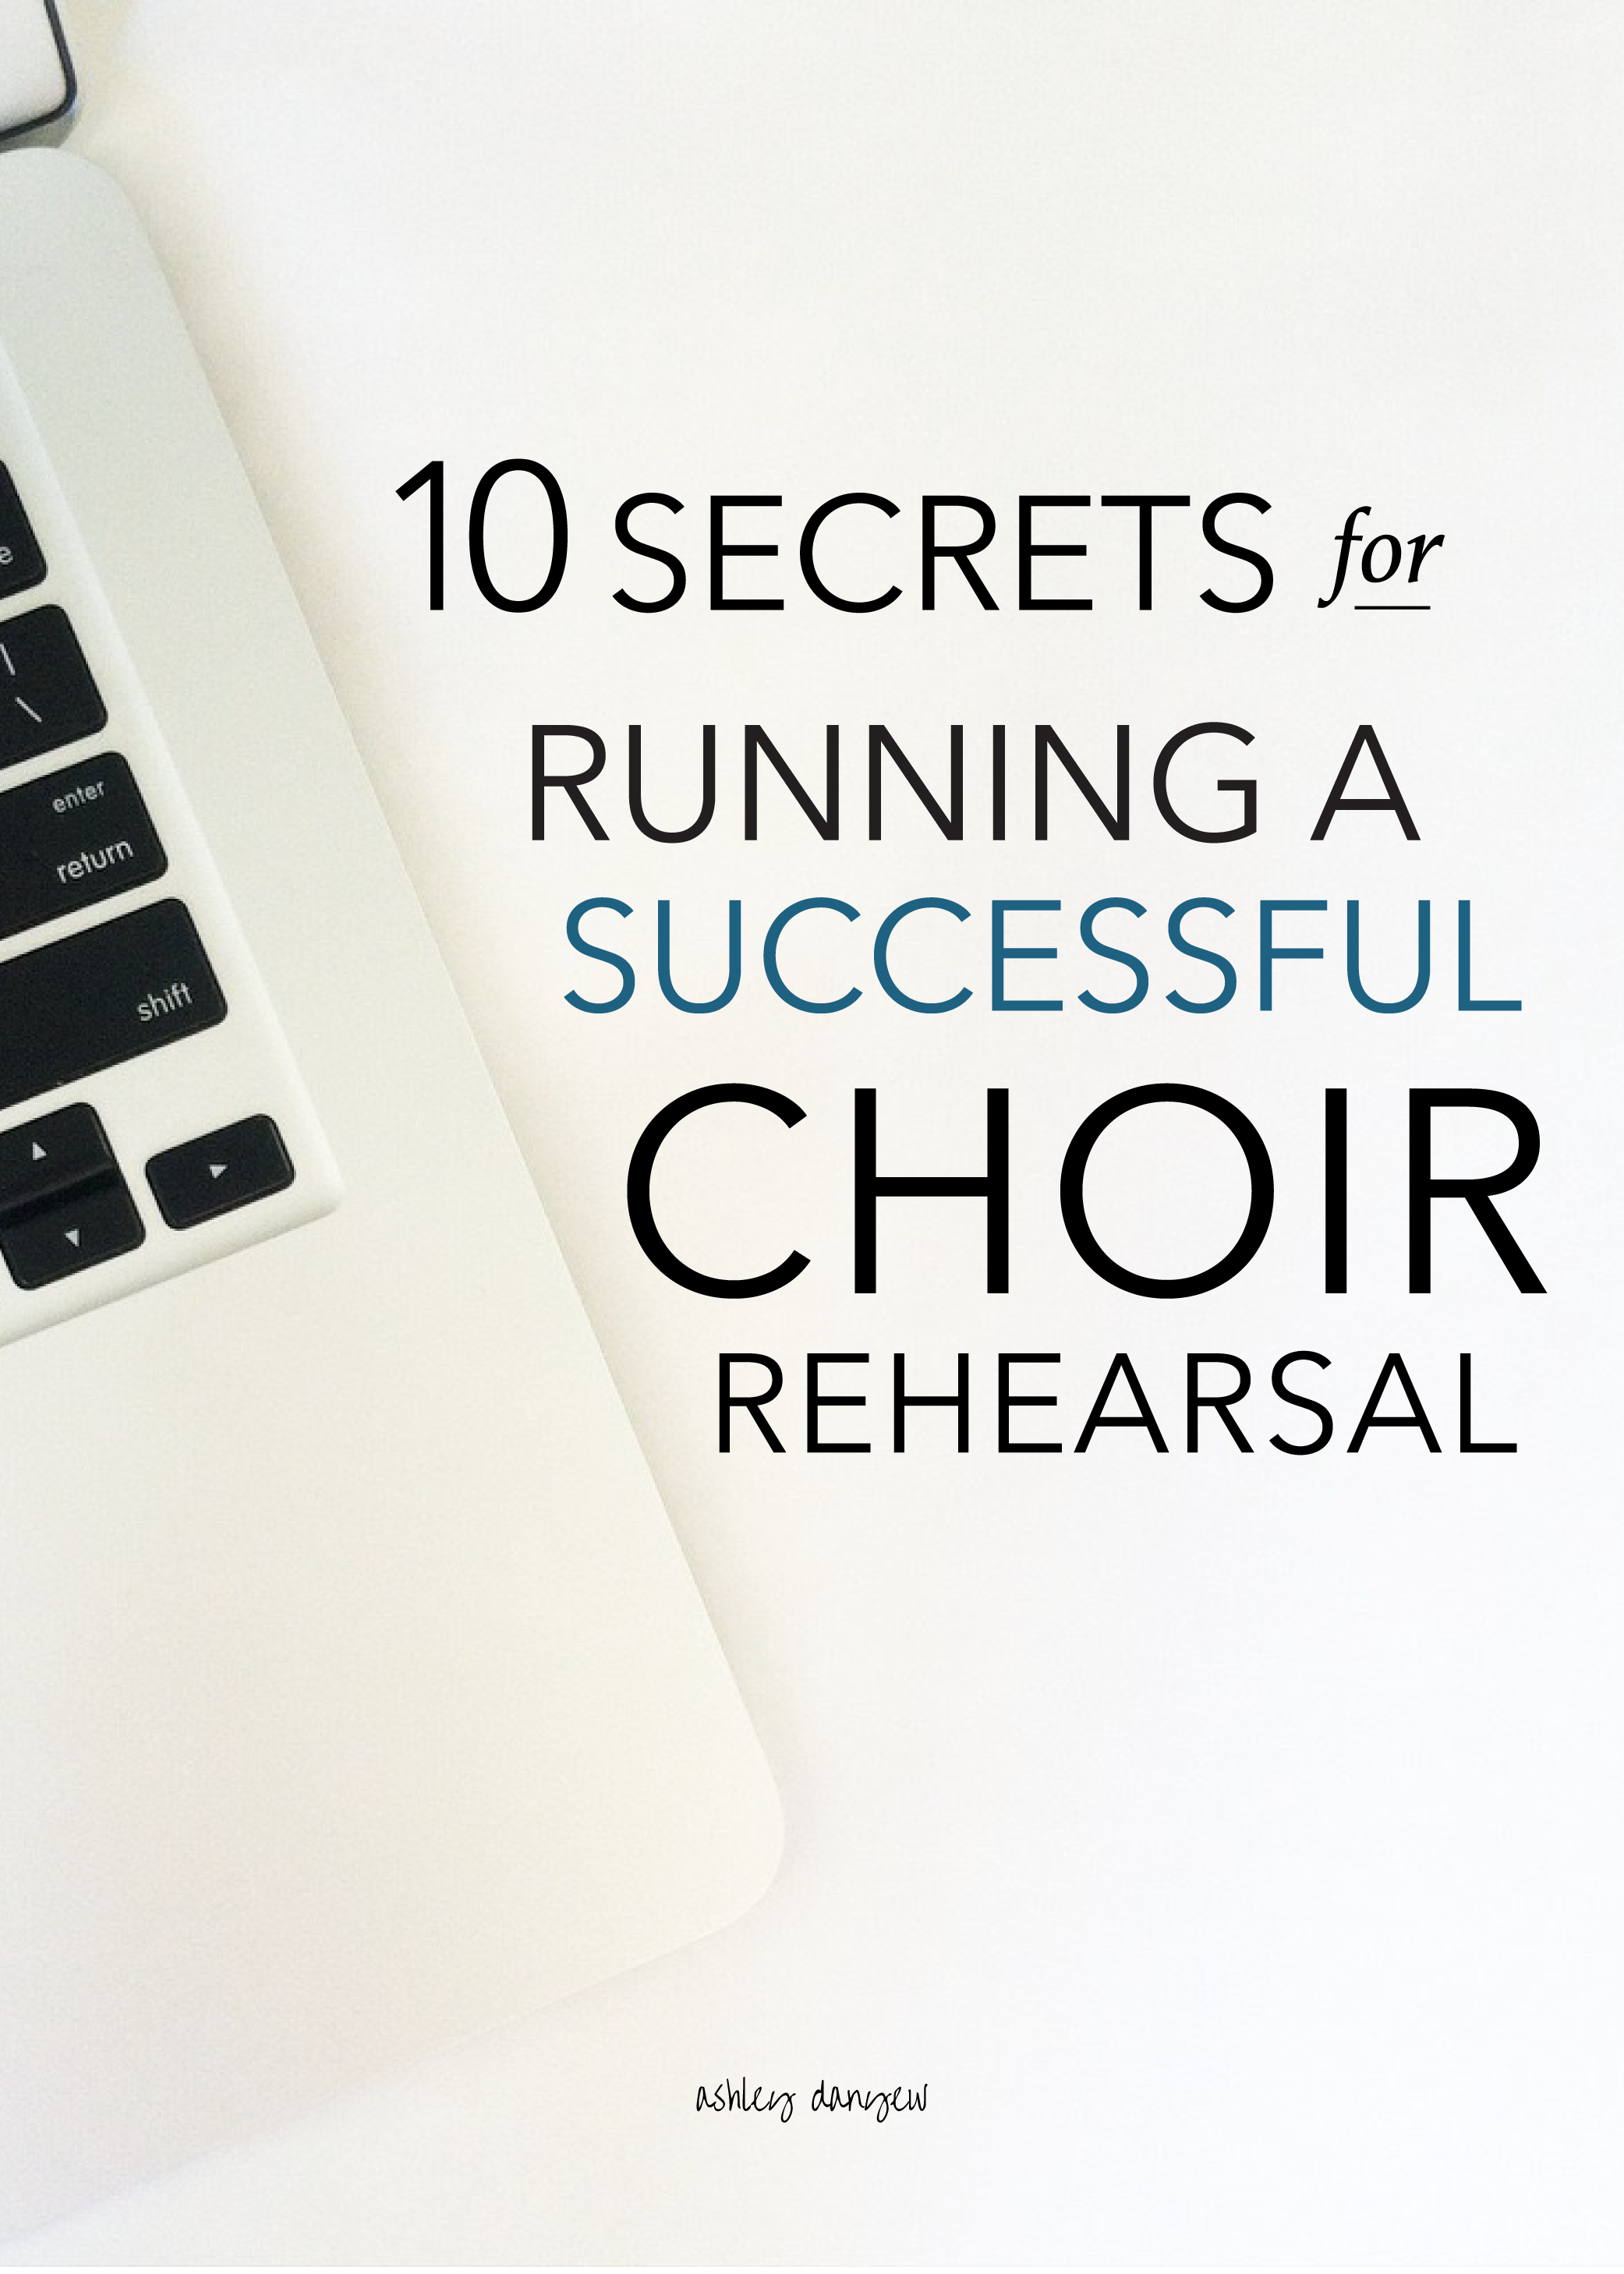 Copy of 10 Secrets to Running a Successful Choir Rehearsal